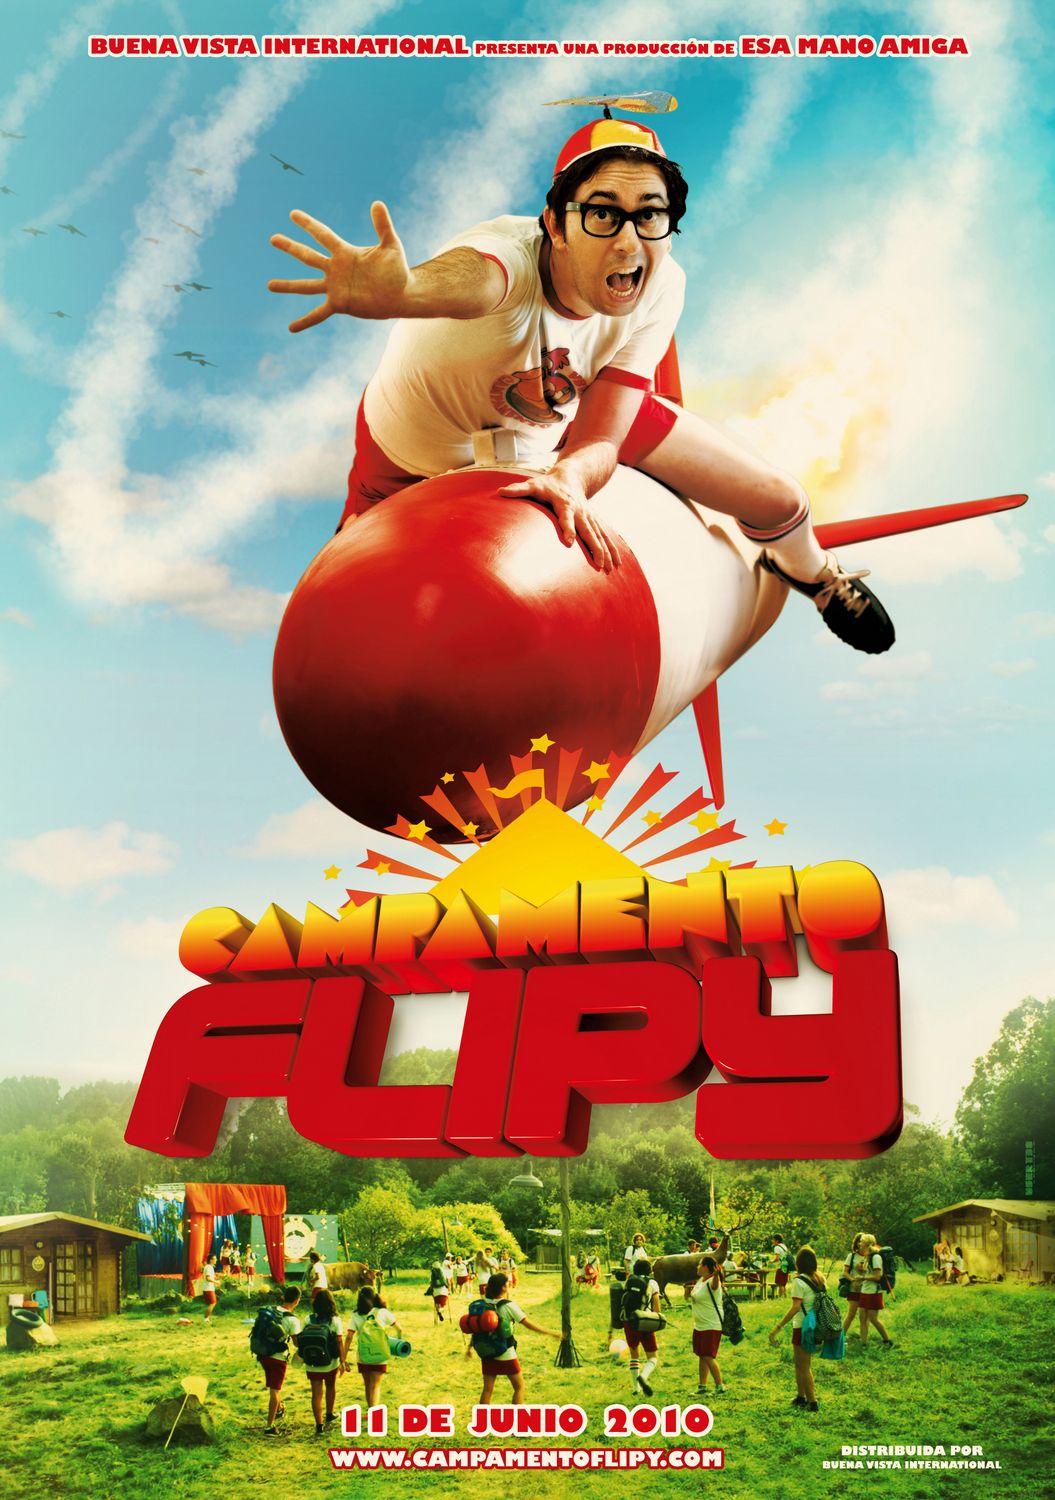 Extra Large Movie Poster Image for Campamento Flipy (#1 of 2)